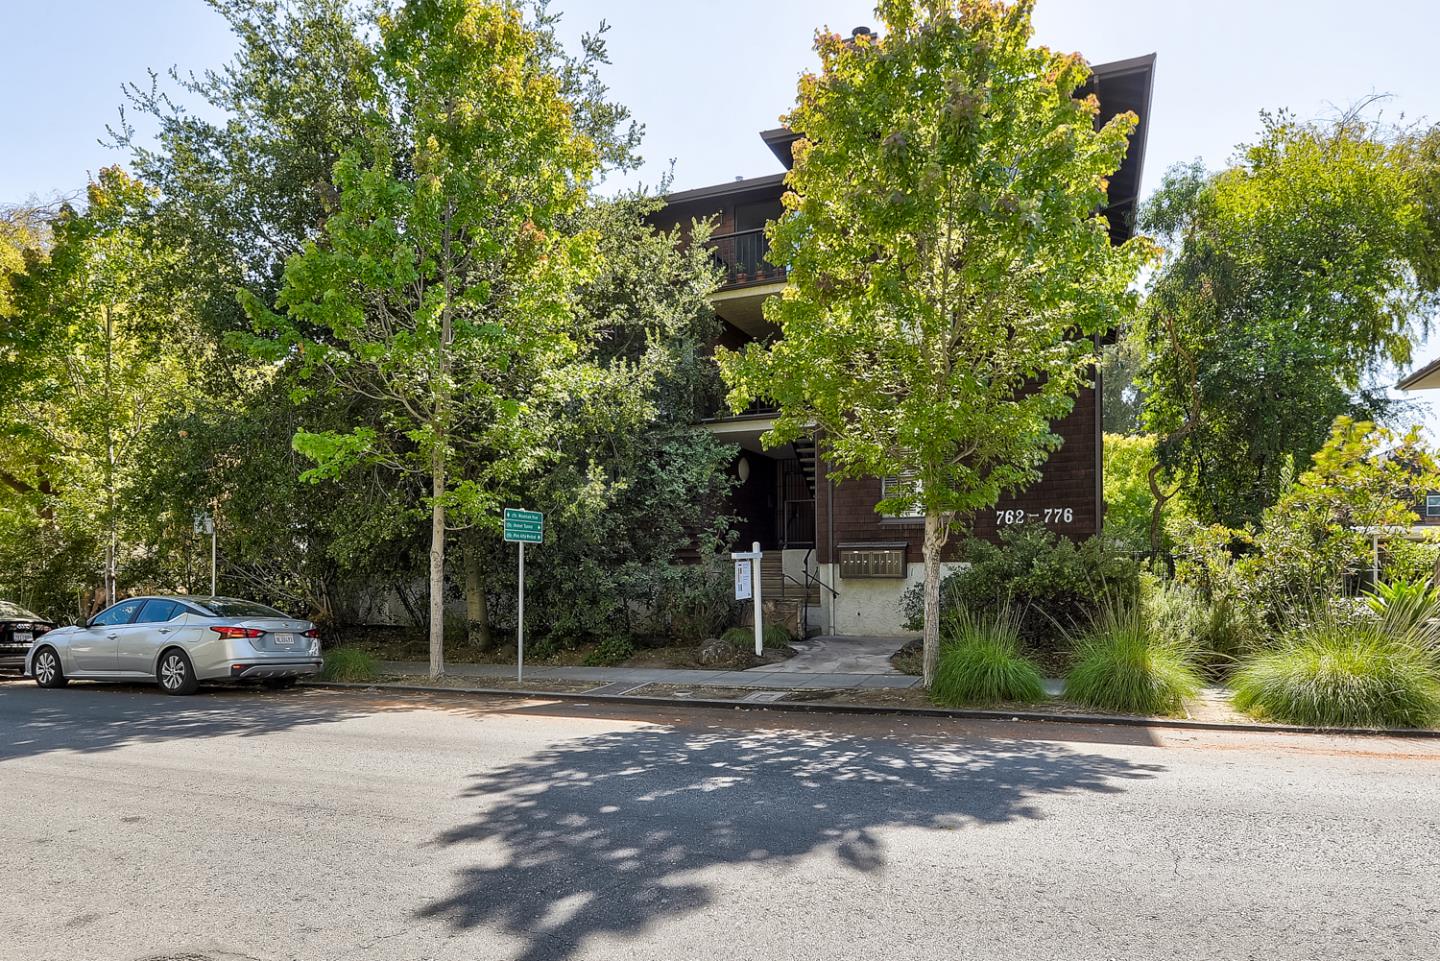 This chic and inviting downtown Palo Alto condo has it all! While situated on a charming treelined peaceful street, the thriving urban vibe of University Avenue is 2 blocks away. This spacious condo was previously a 2 bedroom, 2 bathroom abode and now offers 1 large primary suite along with a second full bathroom. The potential to reconfigure the space is ready for your personal vision and lifestyle. Sub-Zero, Bosch and Dacor appliances enhance the smartly updated kitchen. Stunning built in bookcases and shelving create a sophisticated and functional statement. Amenities include gorgeous hardwood floors, granite countertops, in-unit laundry, balcony, interior louvered shutters, new carpeting, secured underground garage with 2 dedicated parking spaces and storage. Close proximity to Heritage Park, Whole Foods, Caltrain and Top-rated Palo Alto Schools. Perfect for the first-time homebuyer or downsizer looking for a home that offers the quintessential central Palo Alto experience.